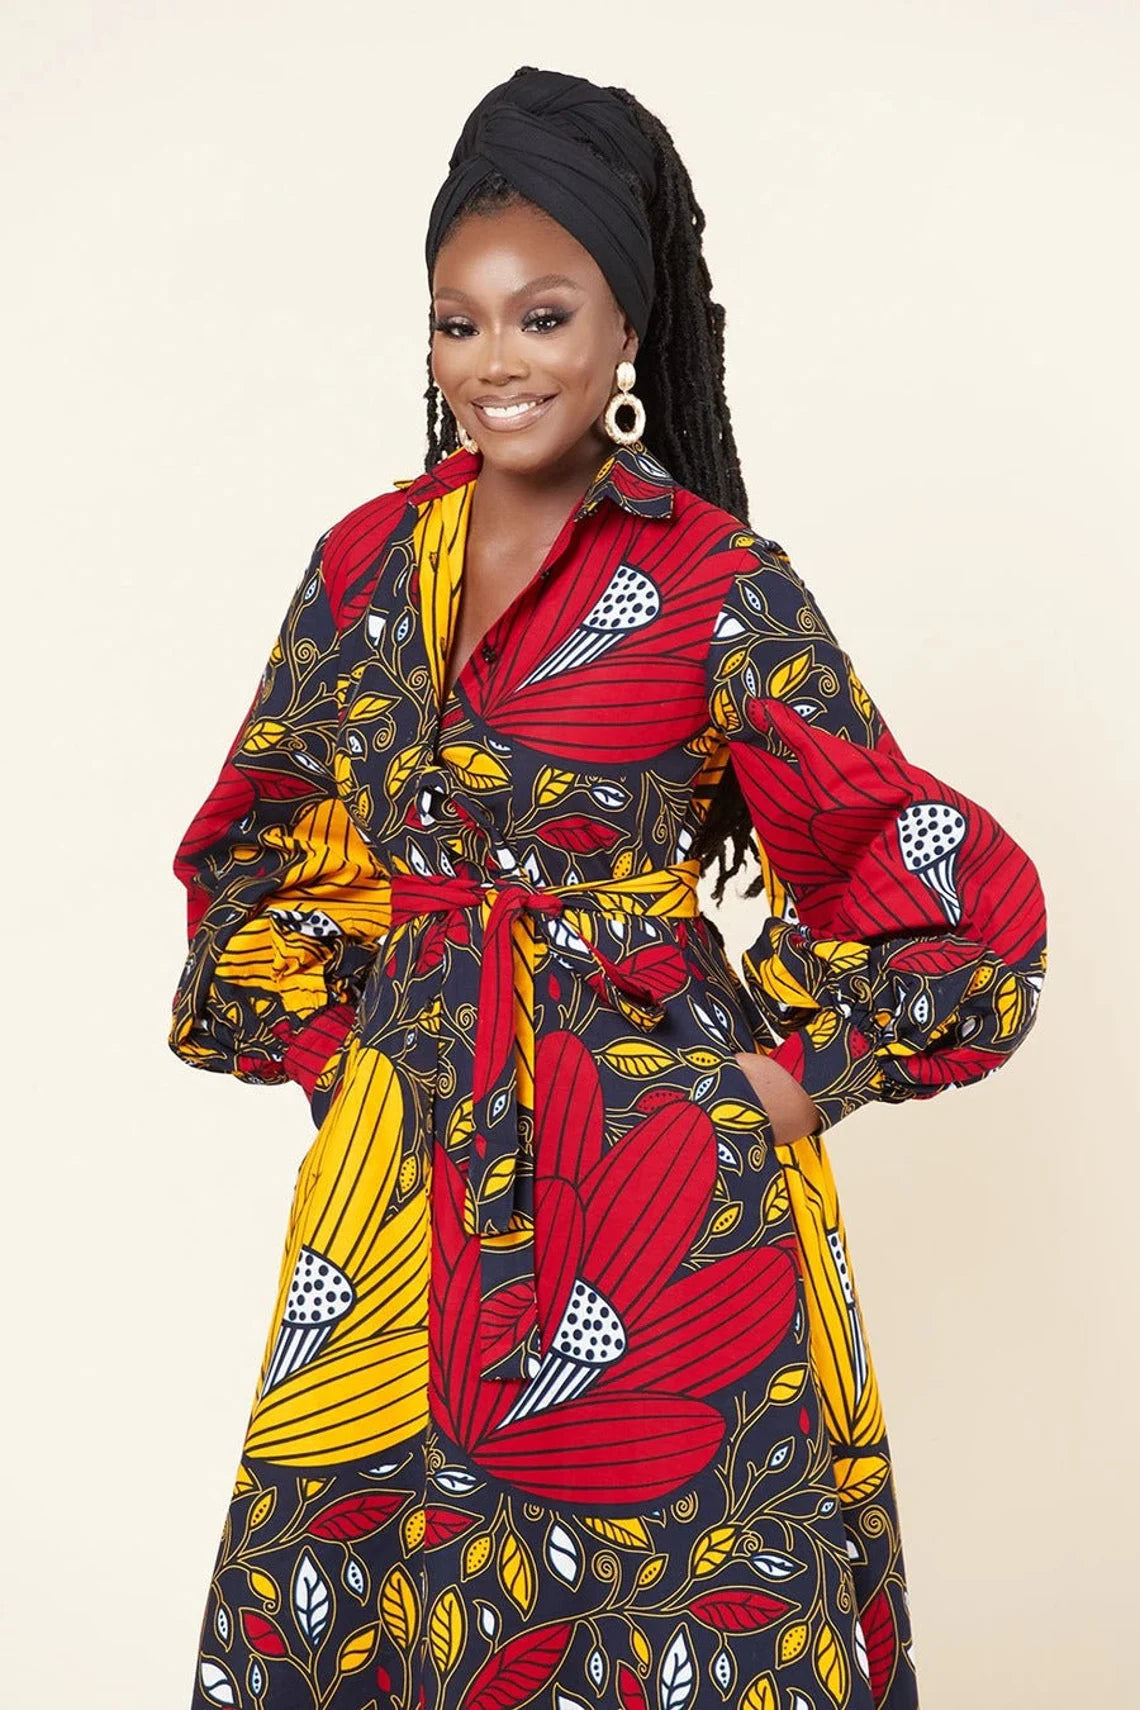 Red Yellow Plus Size African Ankara Print Long Shirt Dress with Free Headwrap and Nose Mask - Flexi Africa - Flexi Africa offers Free Delivery Worldwide - Vibrant African traditional clothing showcasing bold prints and intricate designs